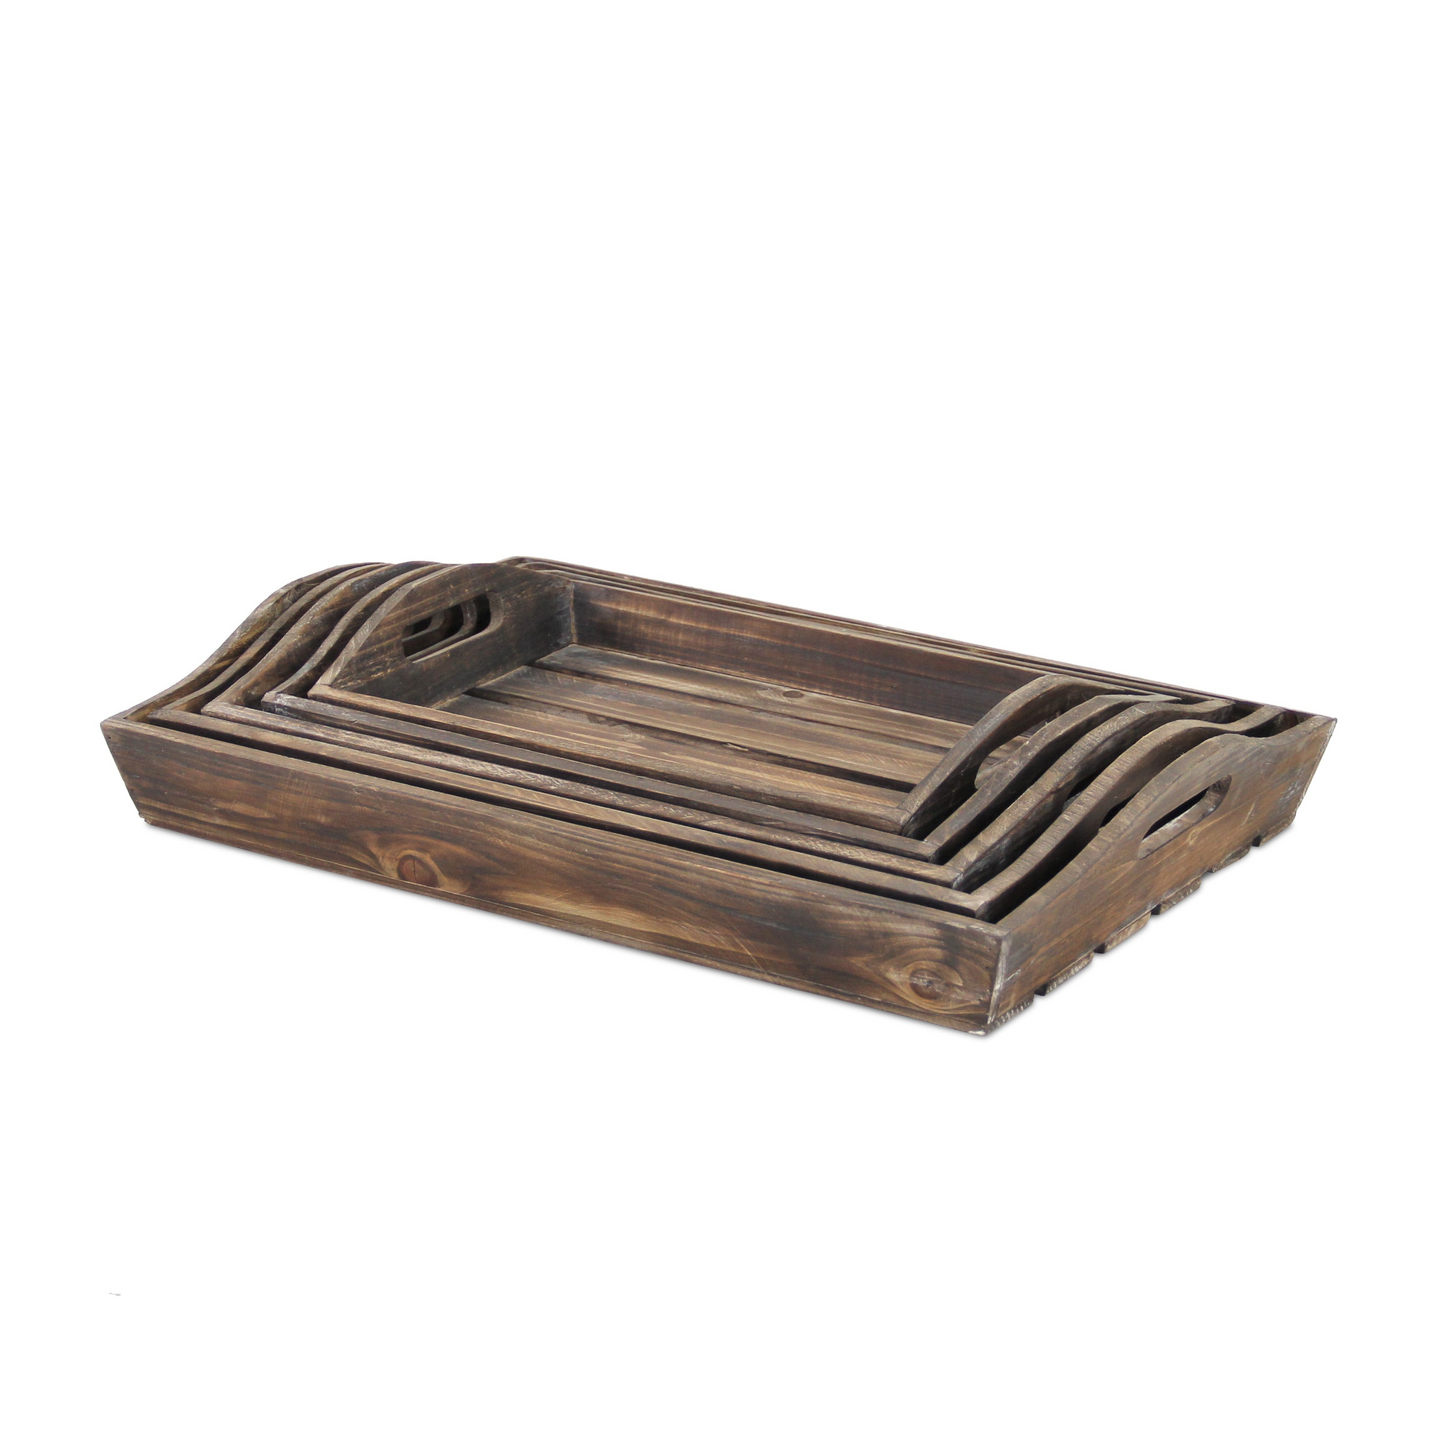 Set Of 5 Rustic Natural Brown Wood Handmade Trays With Handles